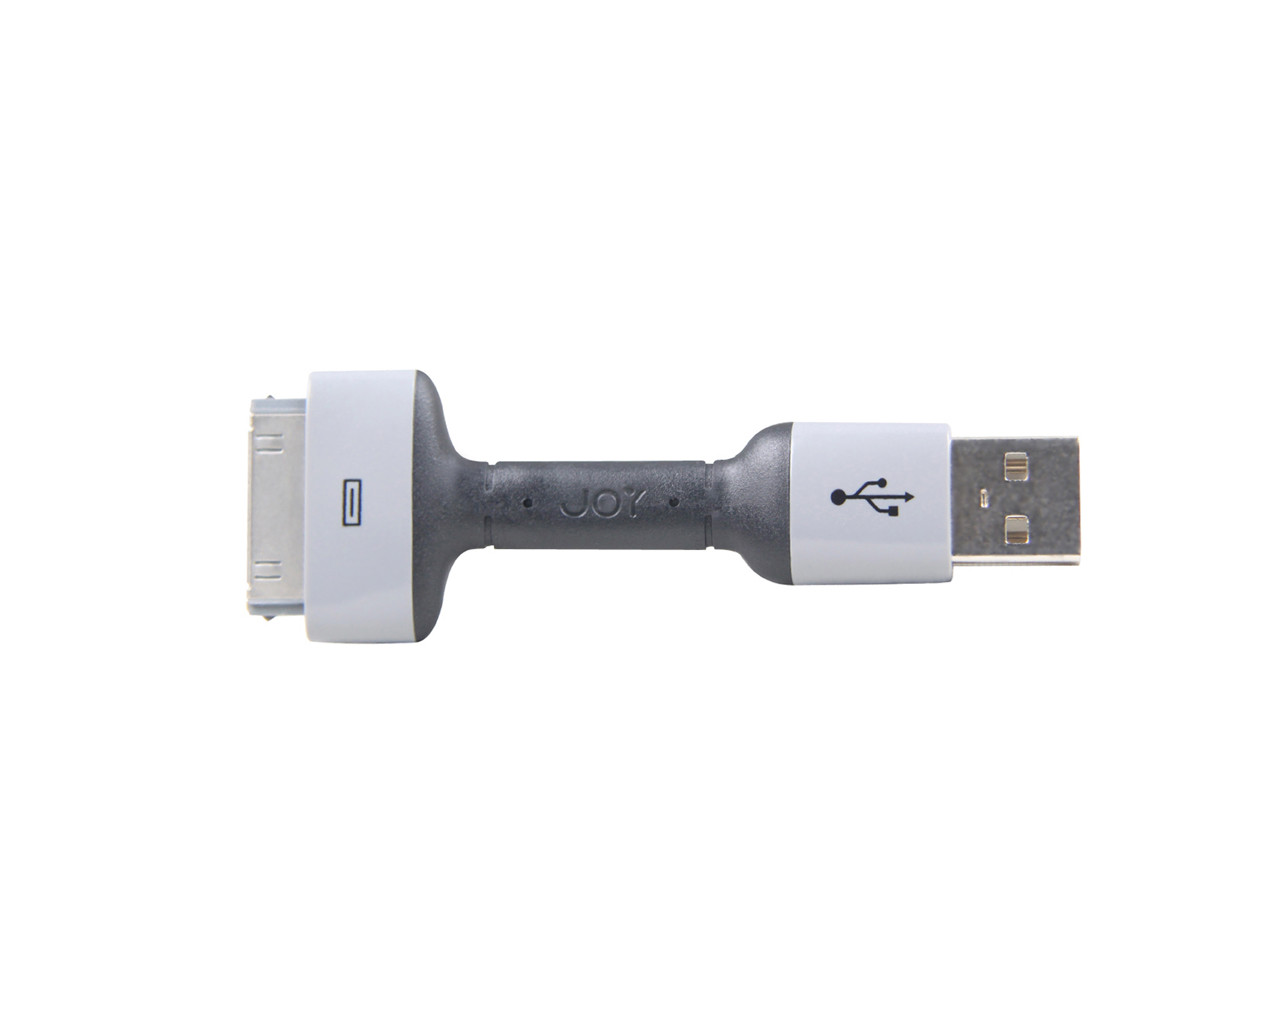 DuraLink USB to 30-pin Ultra Durable & Flexible Cable, 3 inches for iPhones, iPods and iPads - Sozo Distributing Ltd.